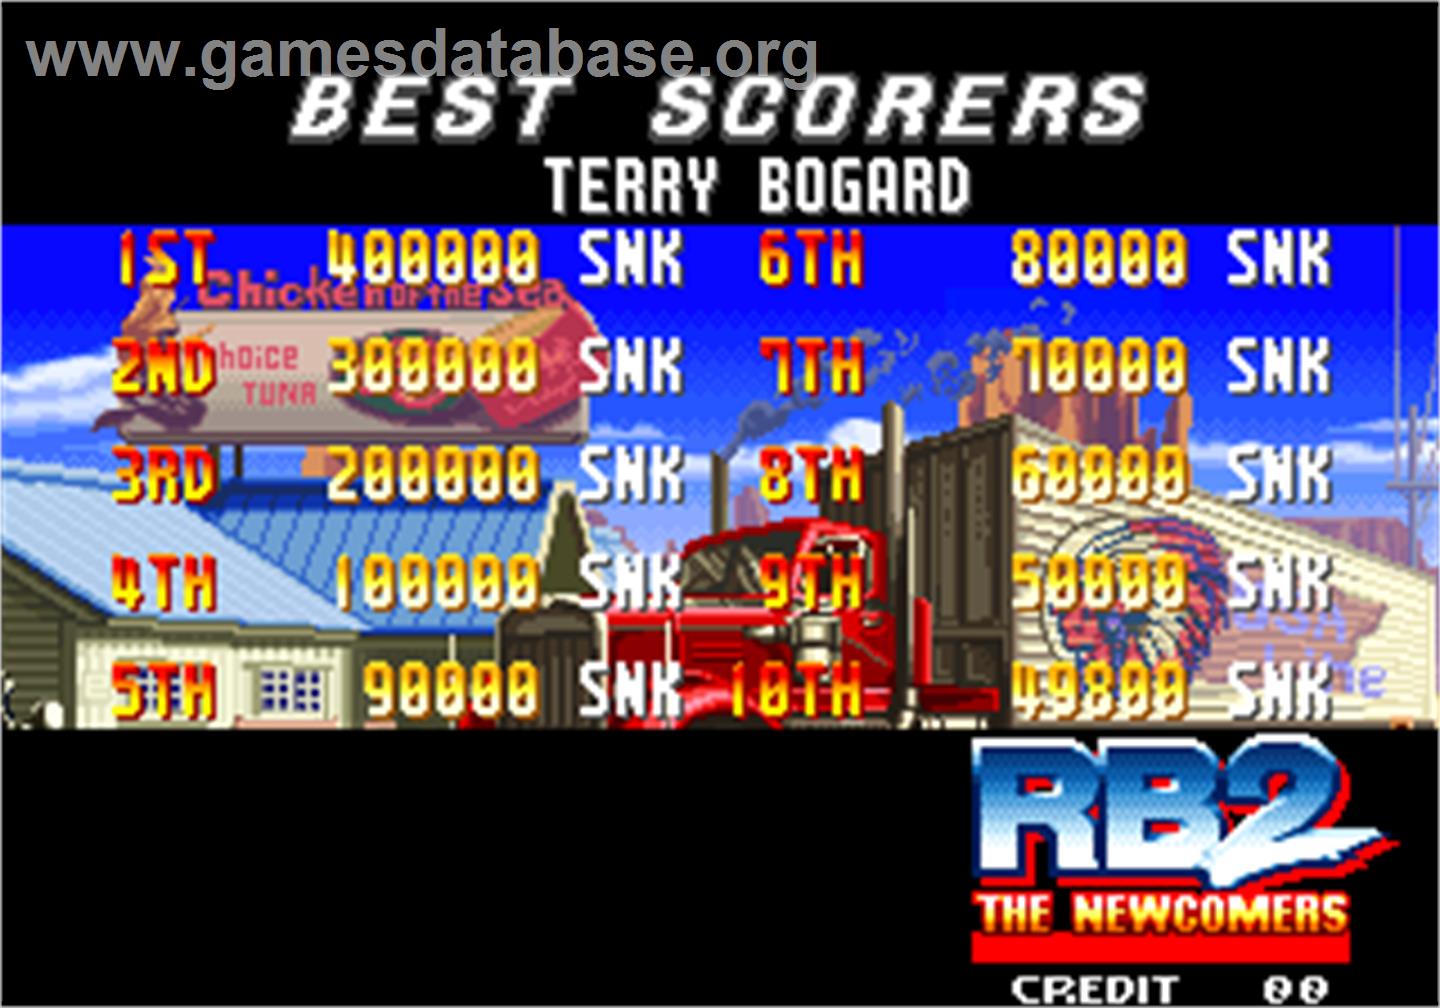 Real Bout Fatal Fury 2 - The Newcomers / Real Bout Garou Densetsu 2 - the newcomers - Arcade - Artwork - High Score Screen